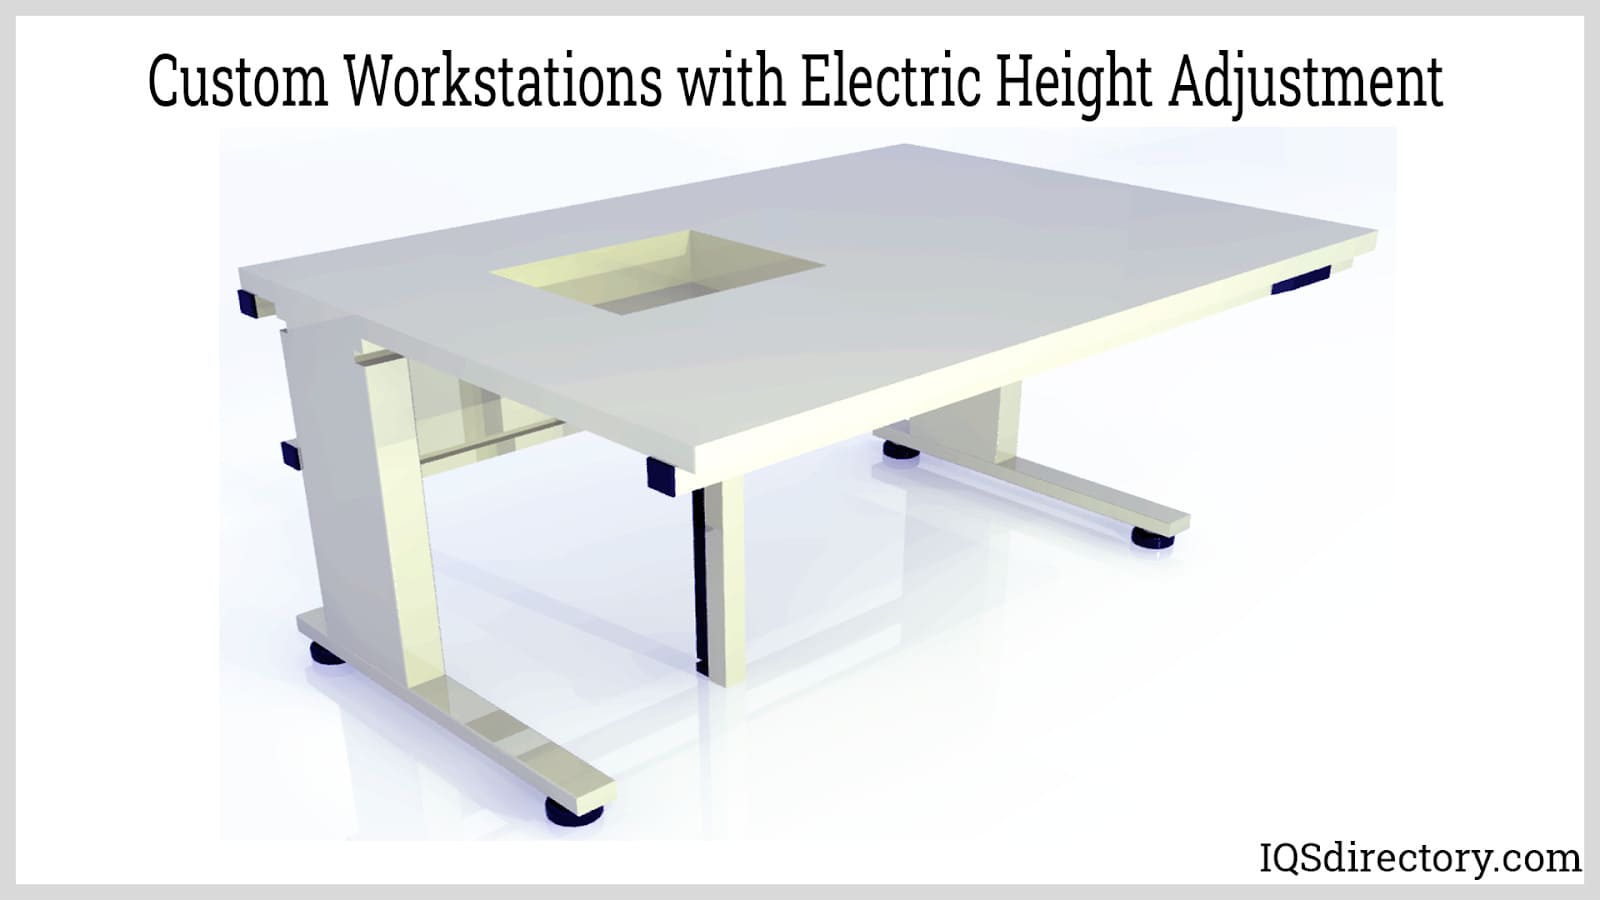 Custom Workstations with Electric Height Adjustment